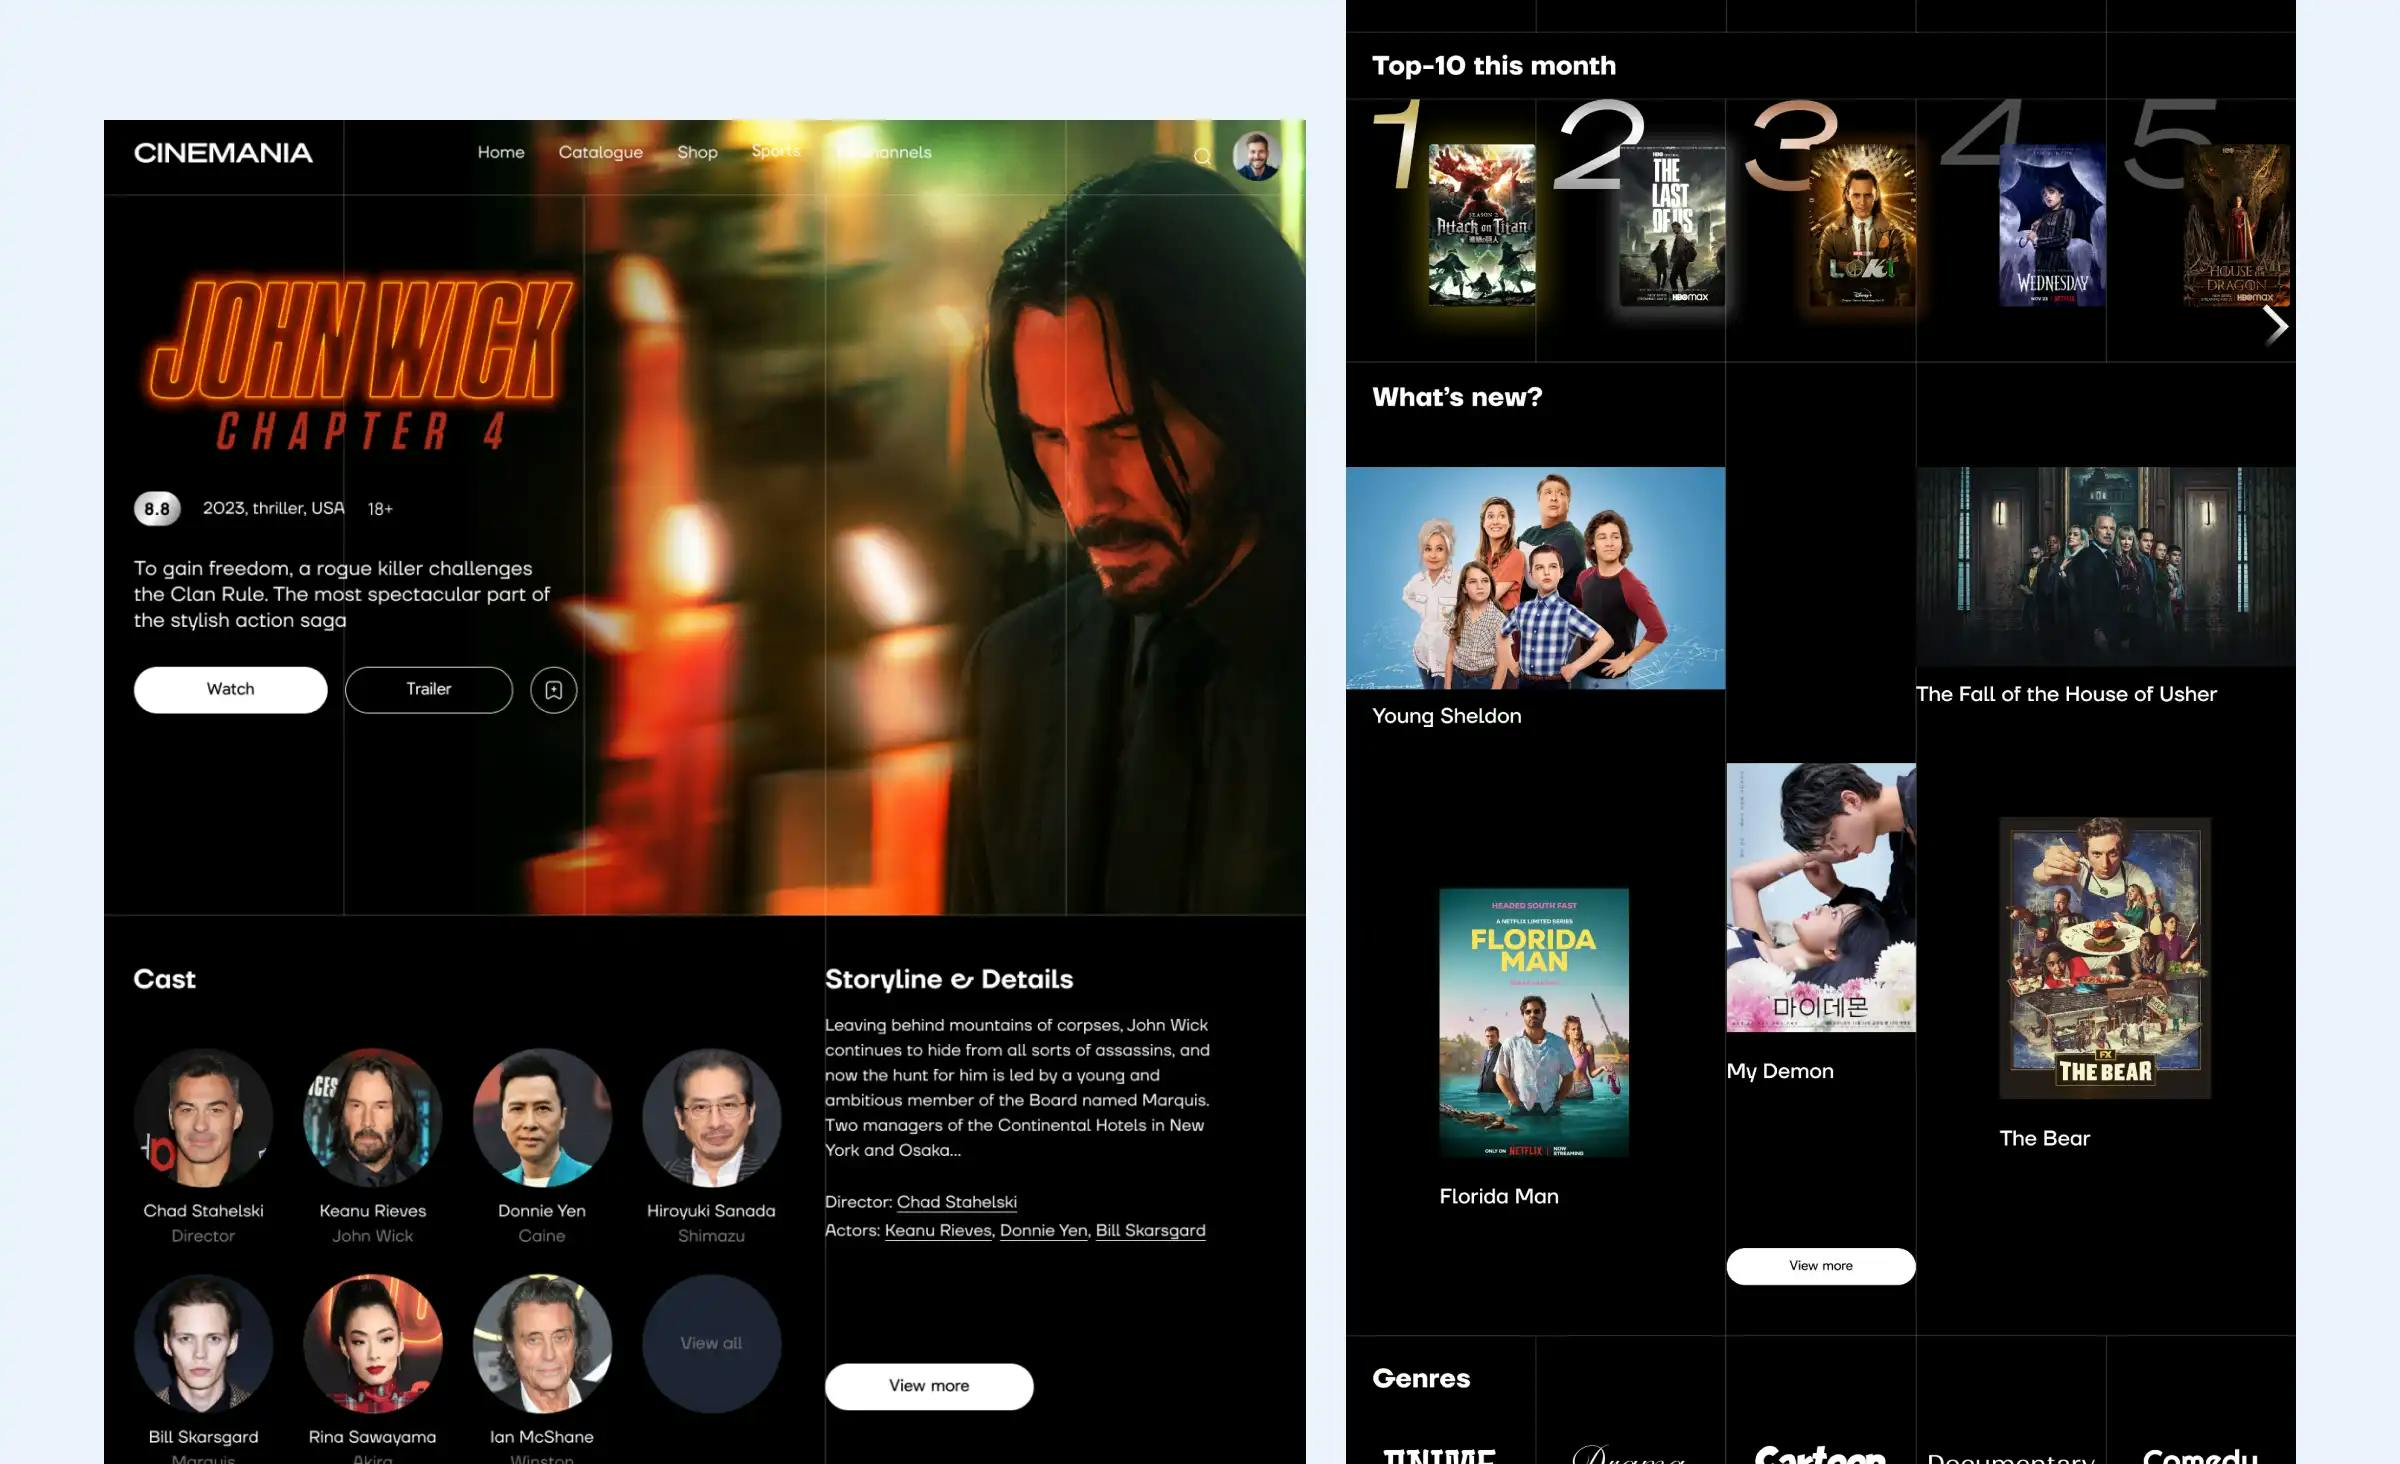 In the image, we see two interfaces of the streaming service design concept created by the Ronas IT team to showcase their capabilities for entertainment software design. The first interface displays a user recommendation feed with categories like "Top 10 This Month" and "What's New." The second interface presents a movie profile (in this case, it's for John Wick Chapter 4) that provides a brief description of the film, "Watch" and "Trailer" buttons, details about the storyline, cast, as well as sequels and prequels.